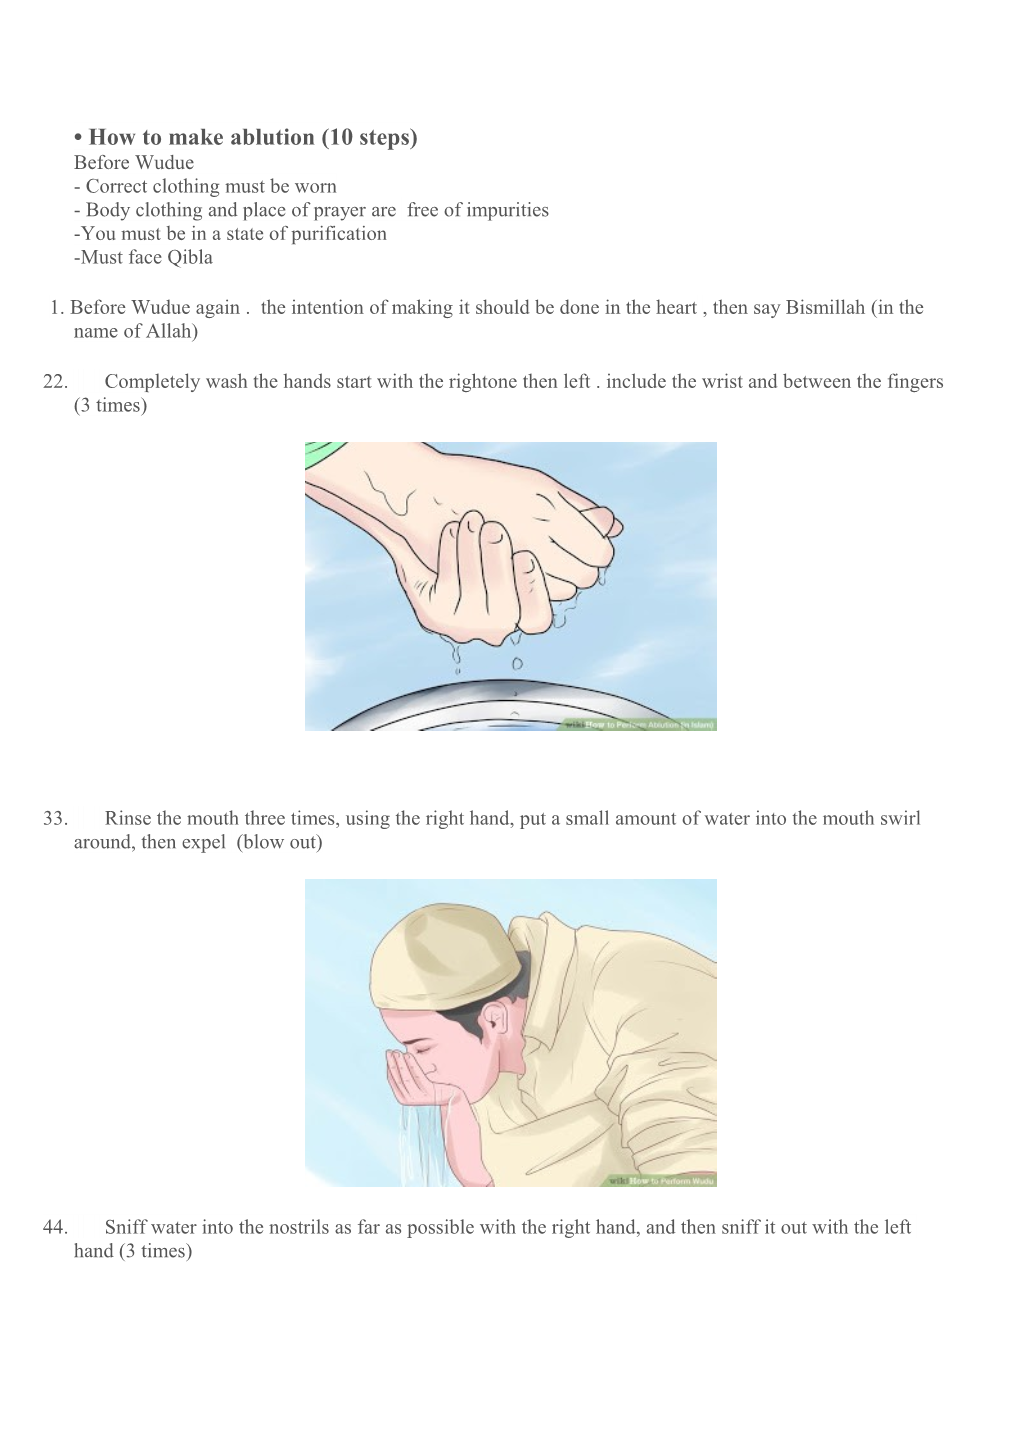 How to Make Ablution (10 Steps)